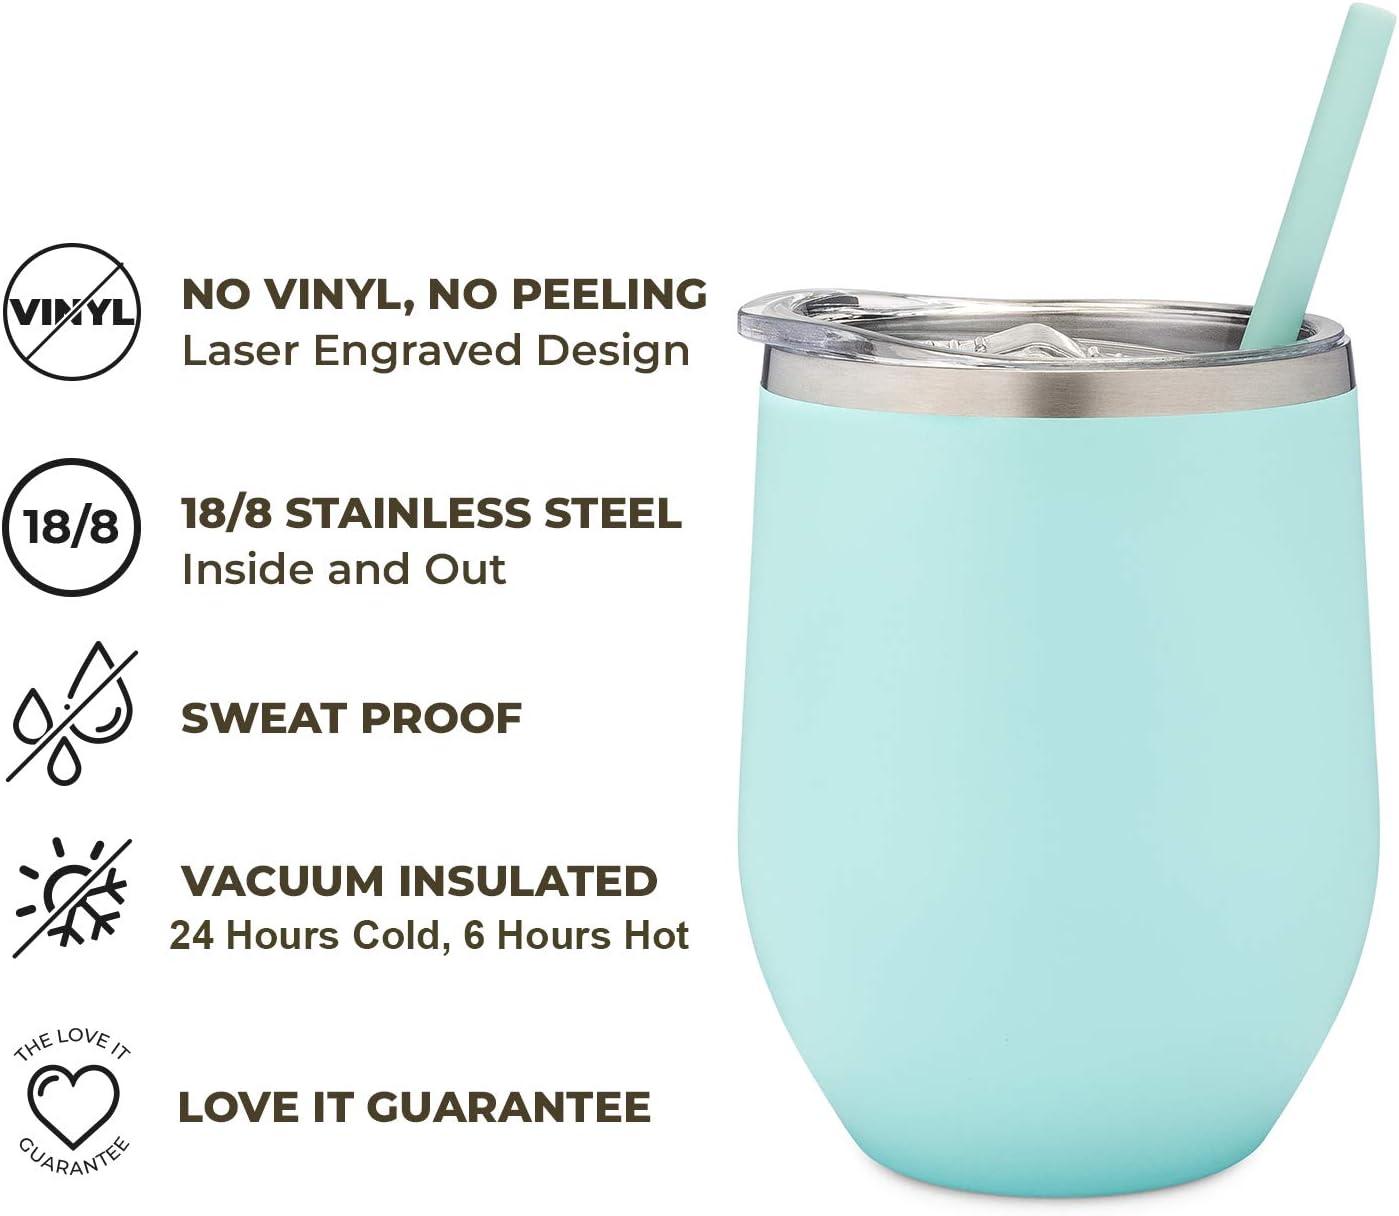 SassyCups Best Bonus Mom Ever Insulated Stainless Steel Tumbler | 22 Ounce  Engraved Mint Travel Mug with Lid and Straw | Stepmom - Mother in Law 